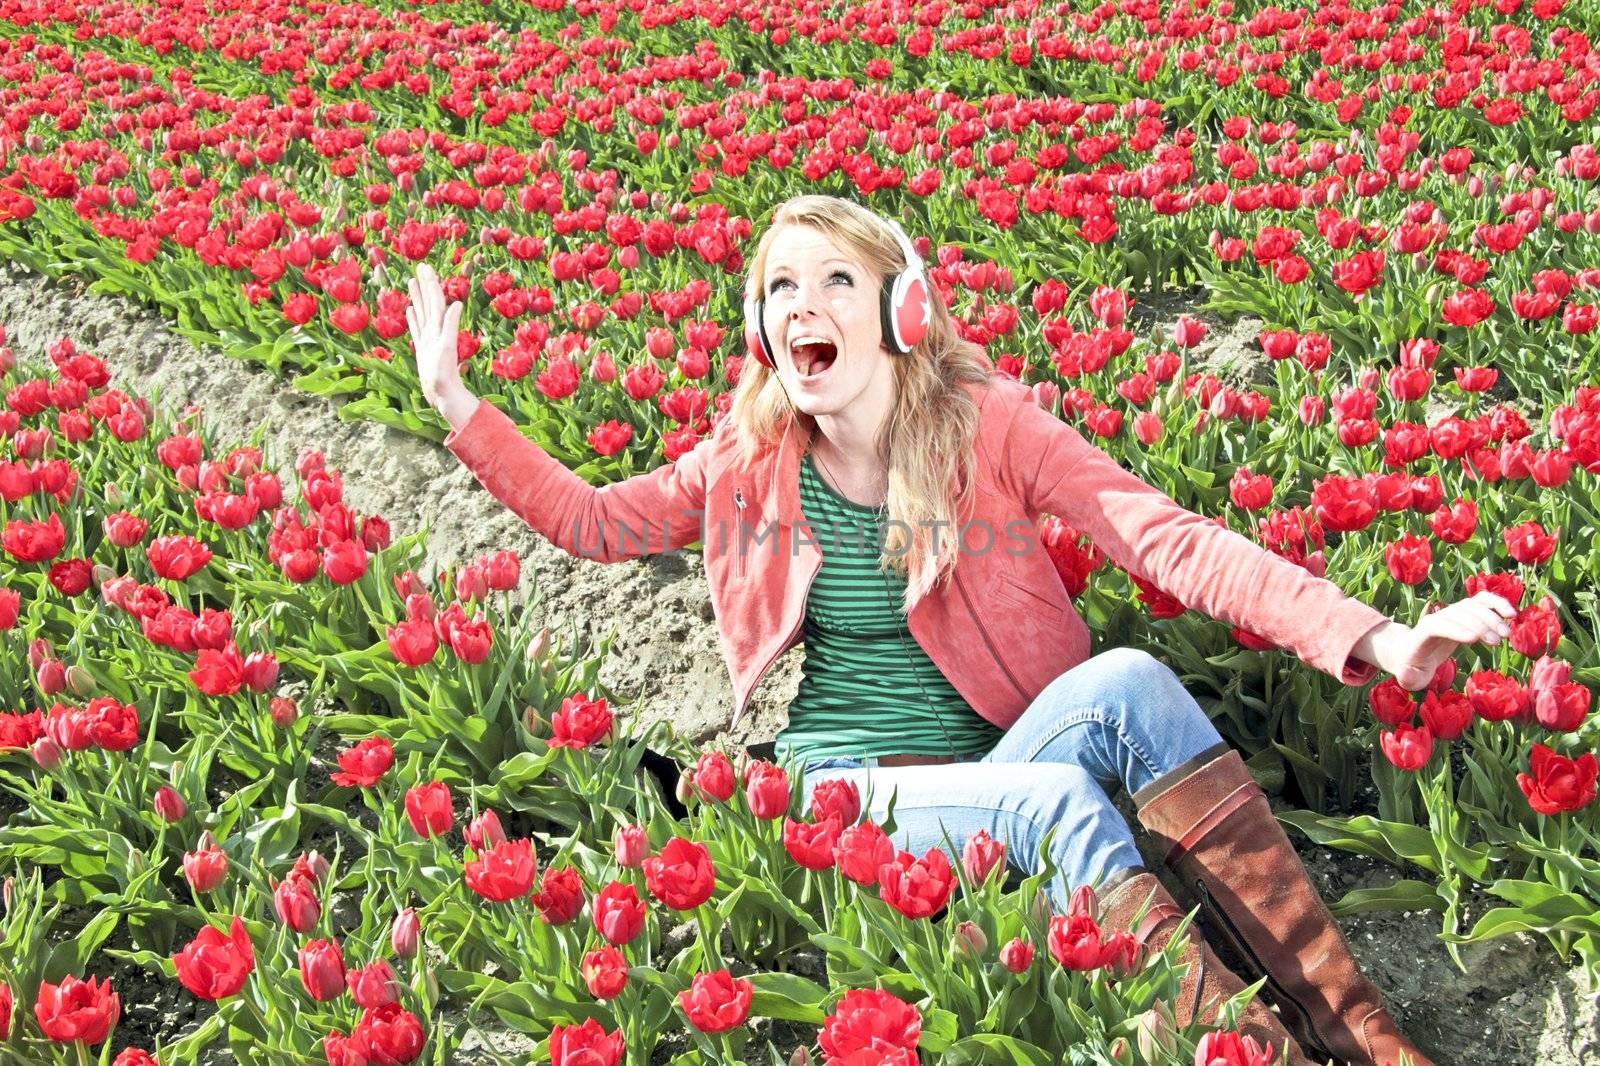 Happy girl enjoying the music in the tulip fields from the Nethe by devy